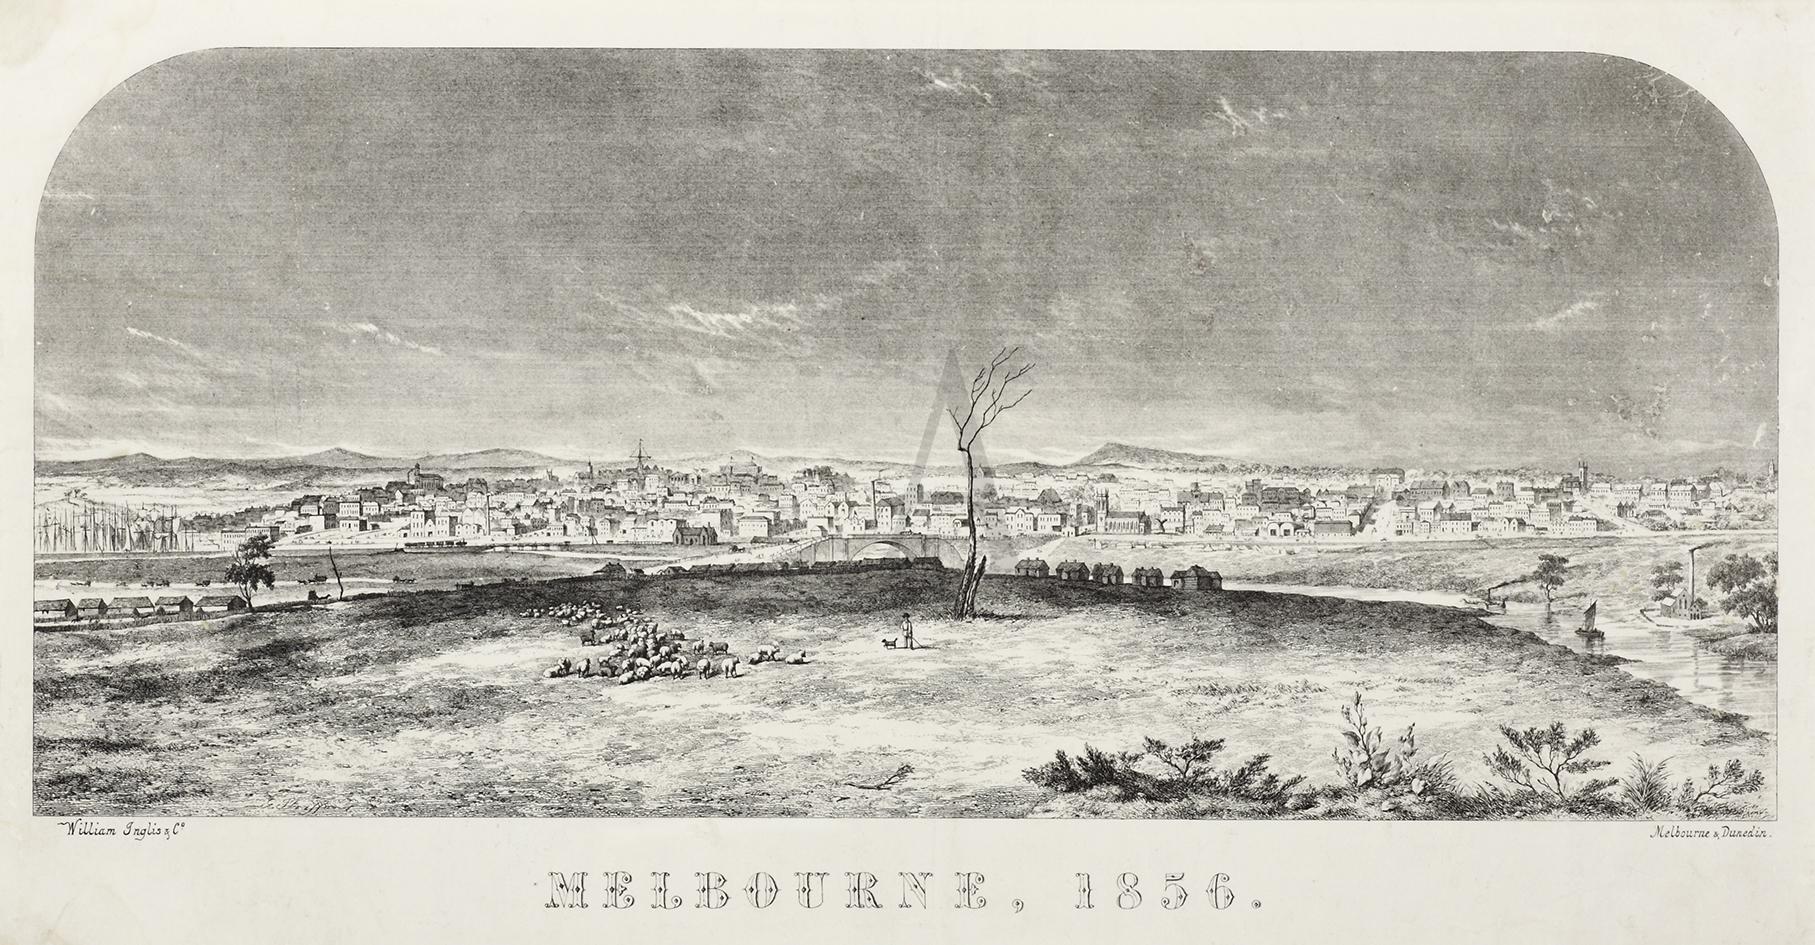 Melbourne, 1856. - Antique Print from 1856